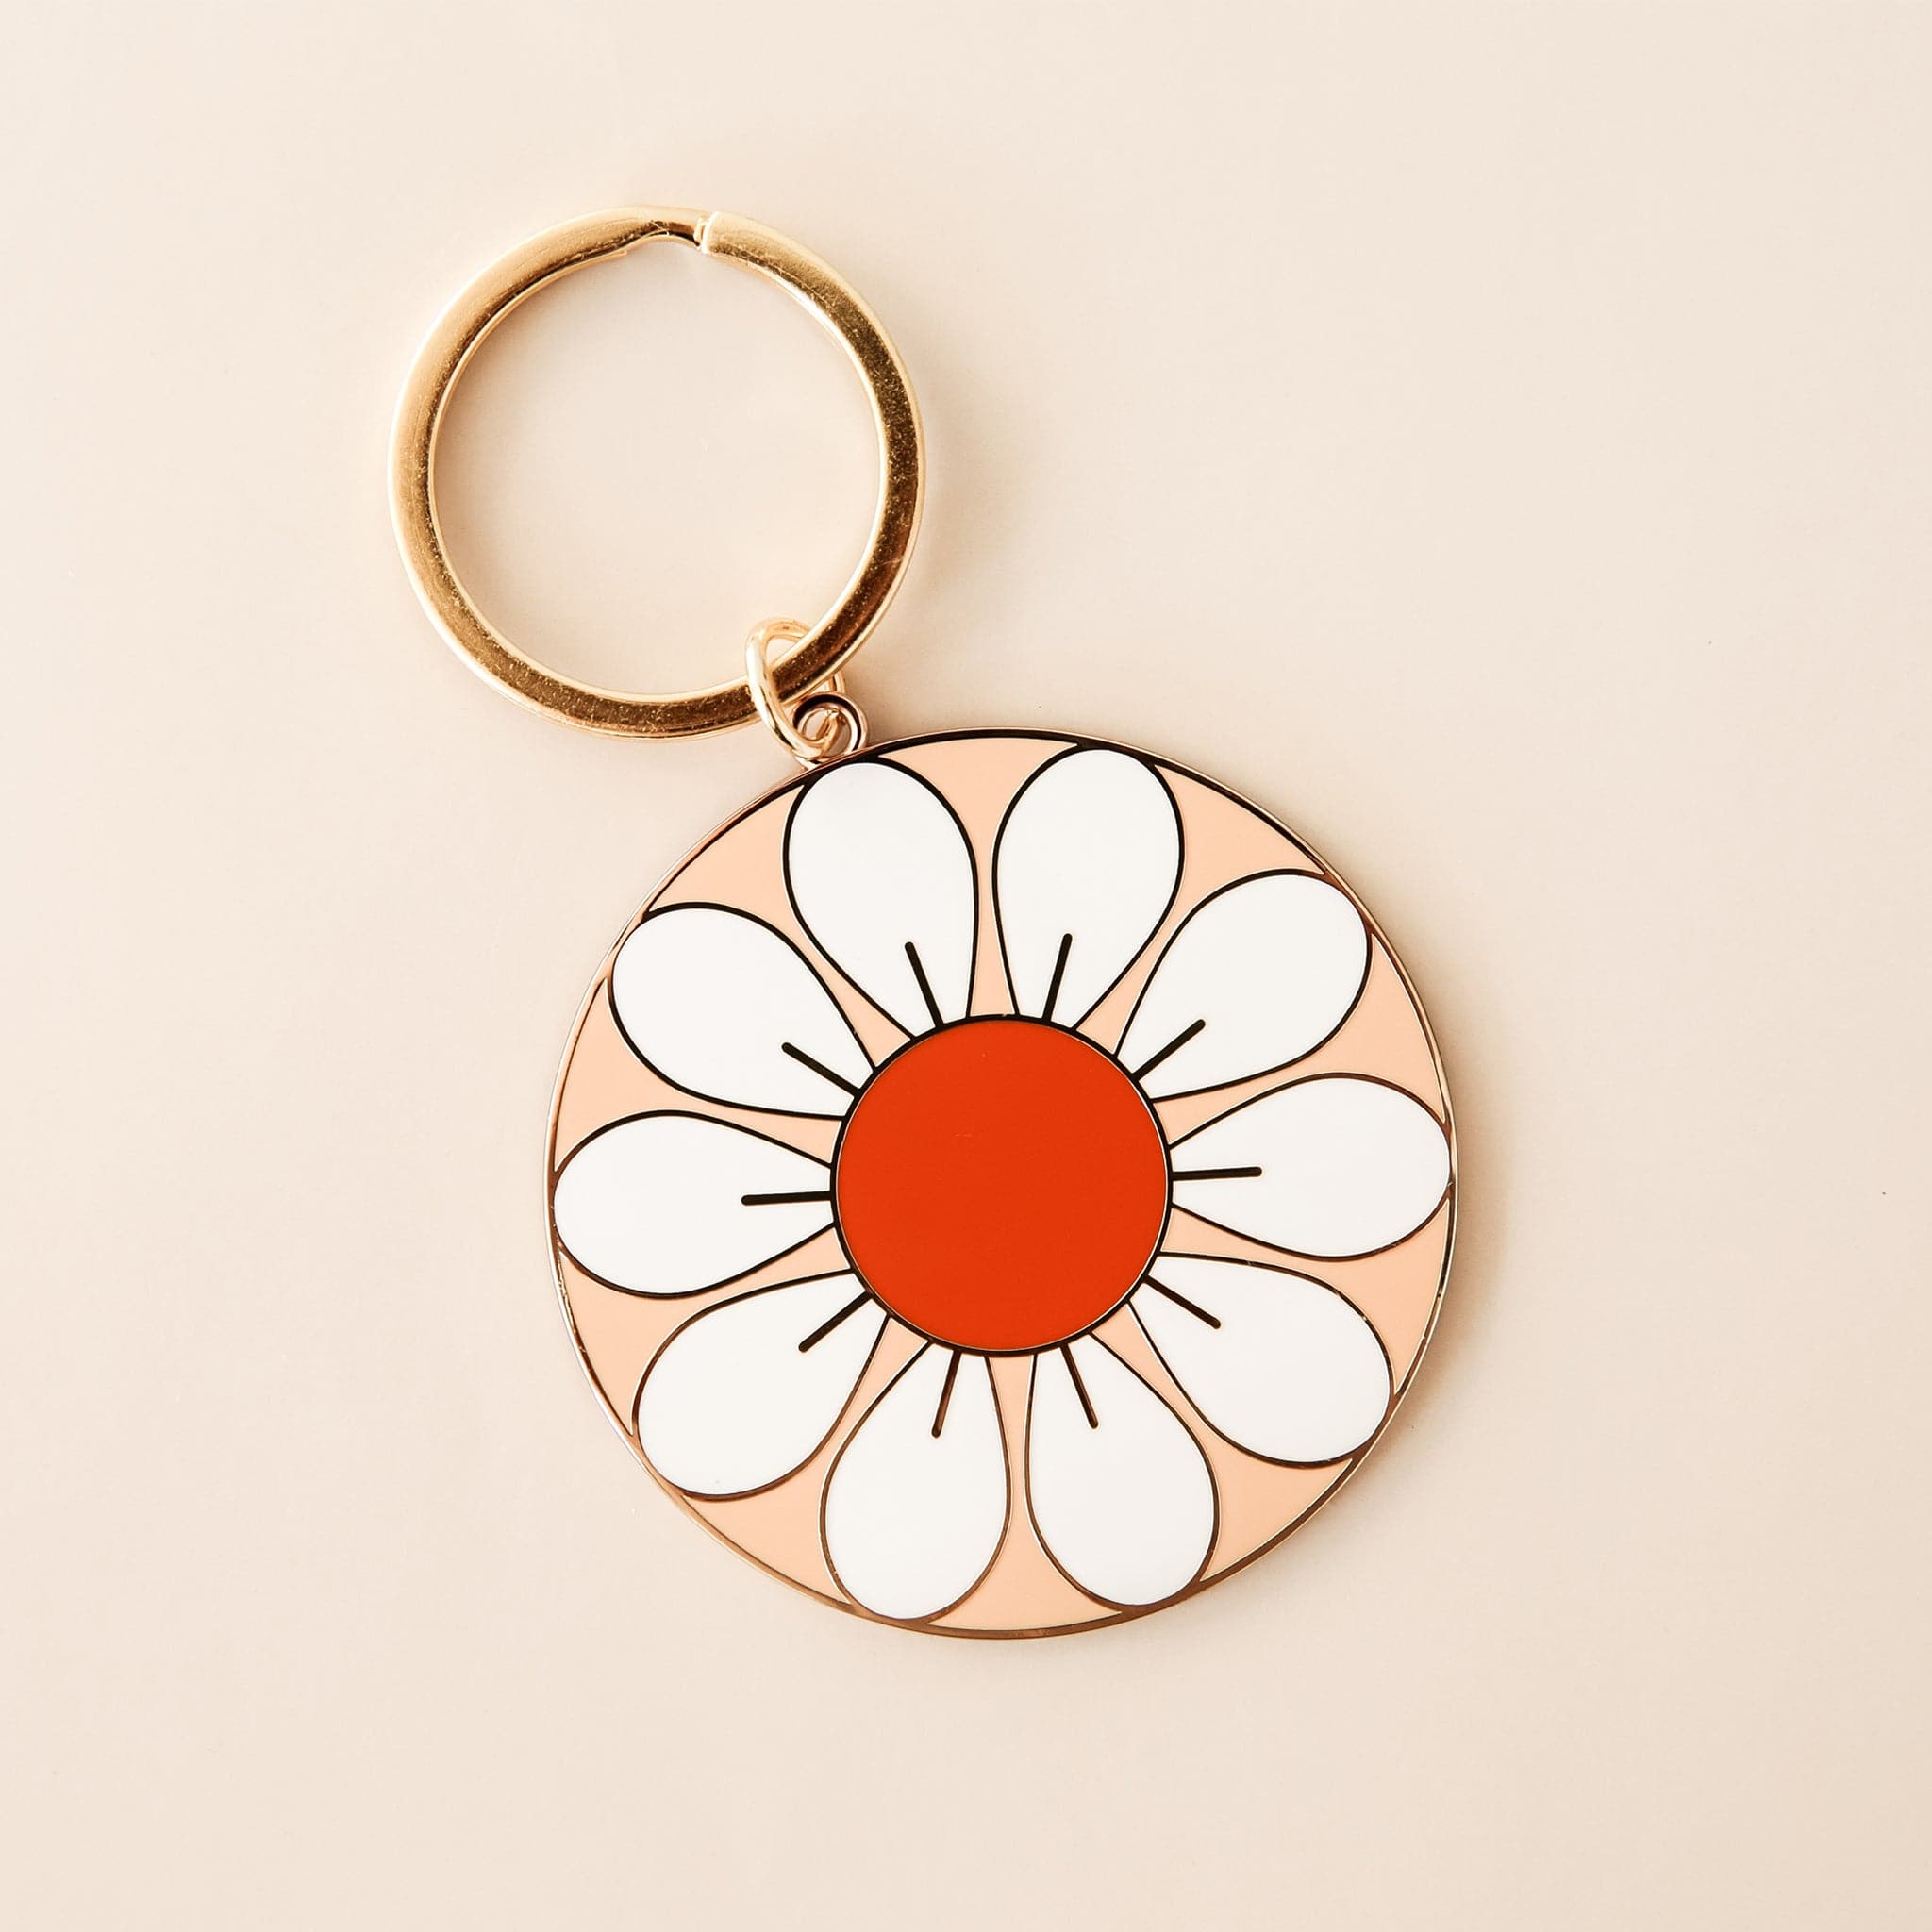 Circle flower keychain with white petals and red-orange center. The keychain is complete with a golden key chain ring. 